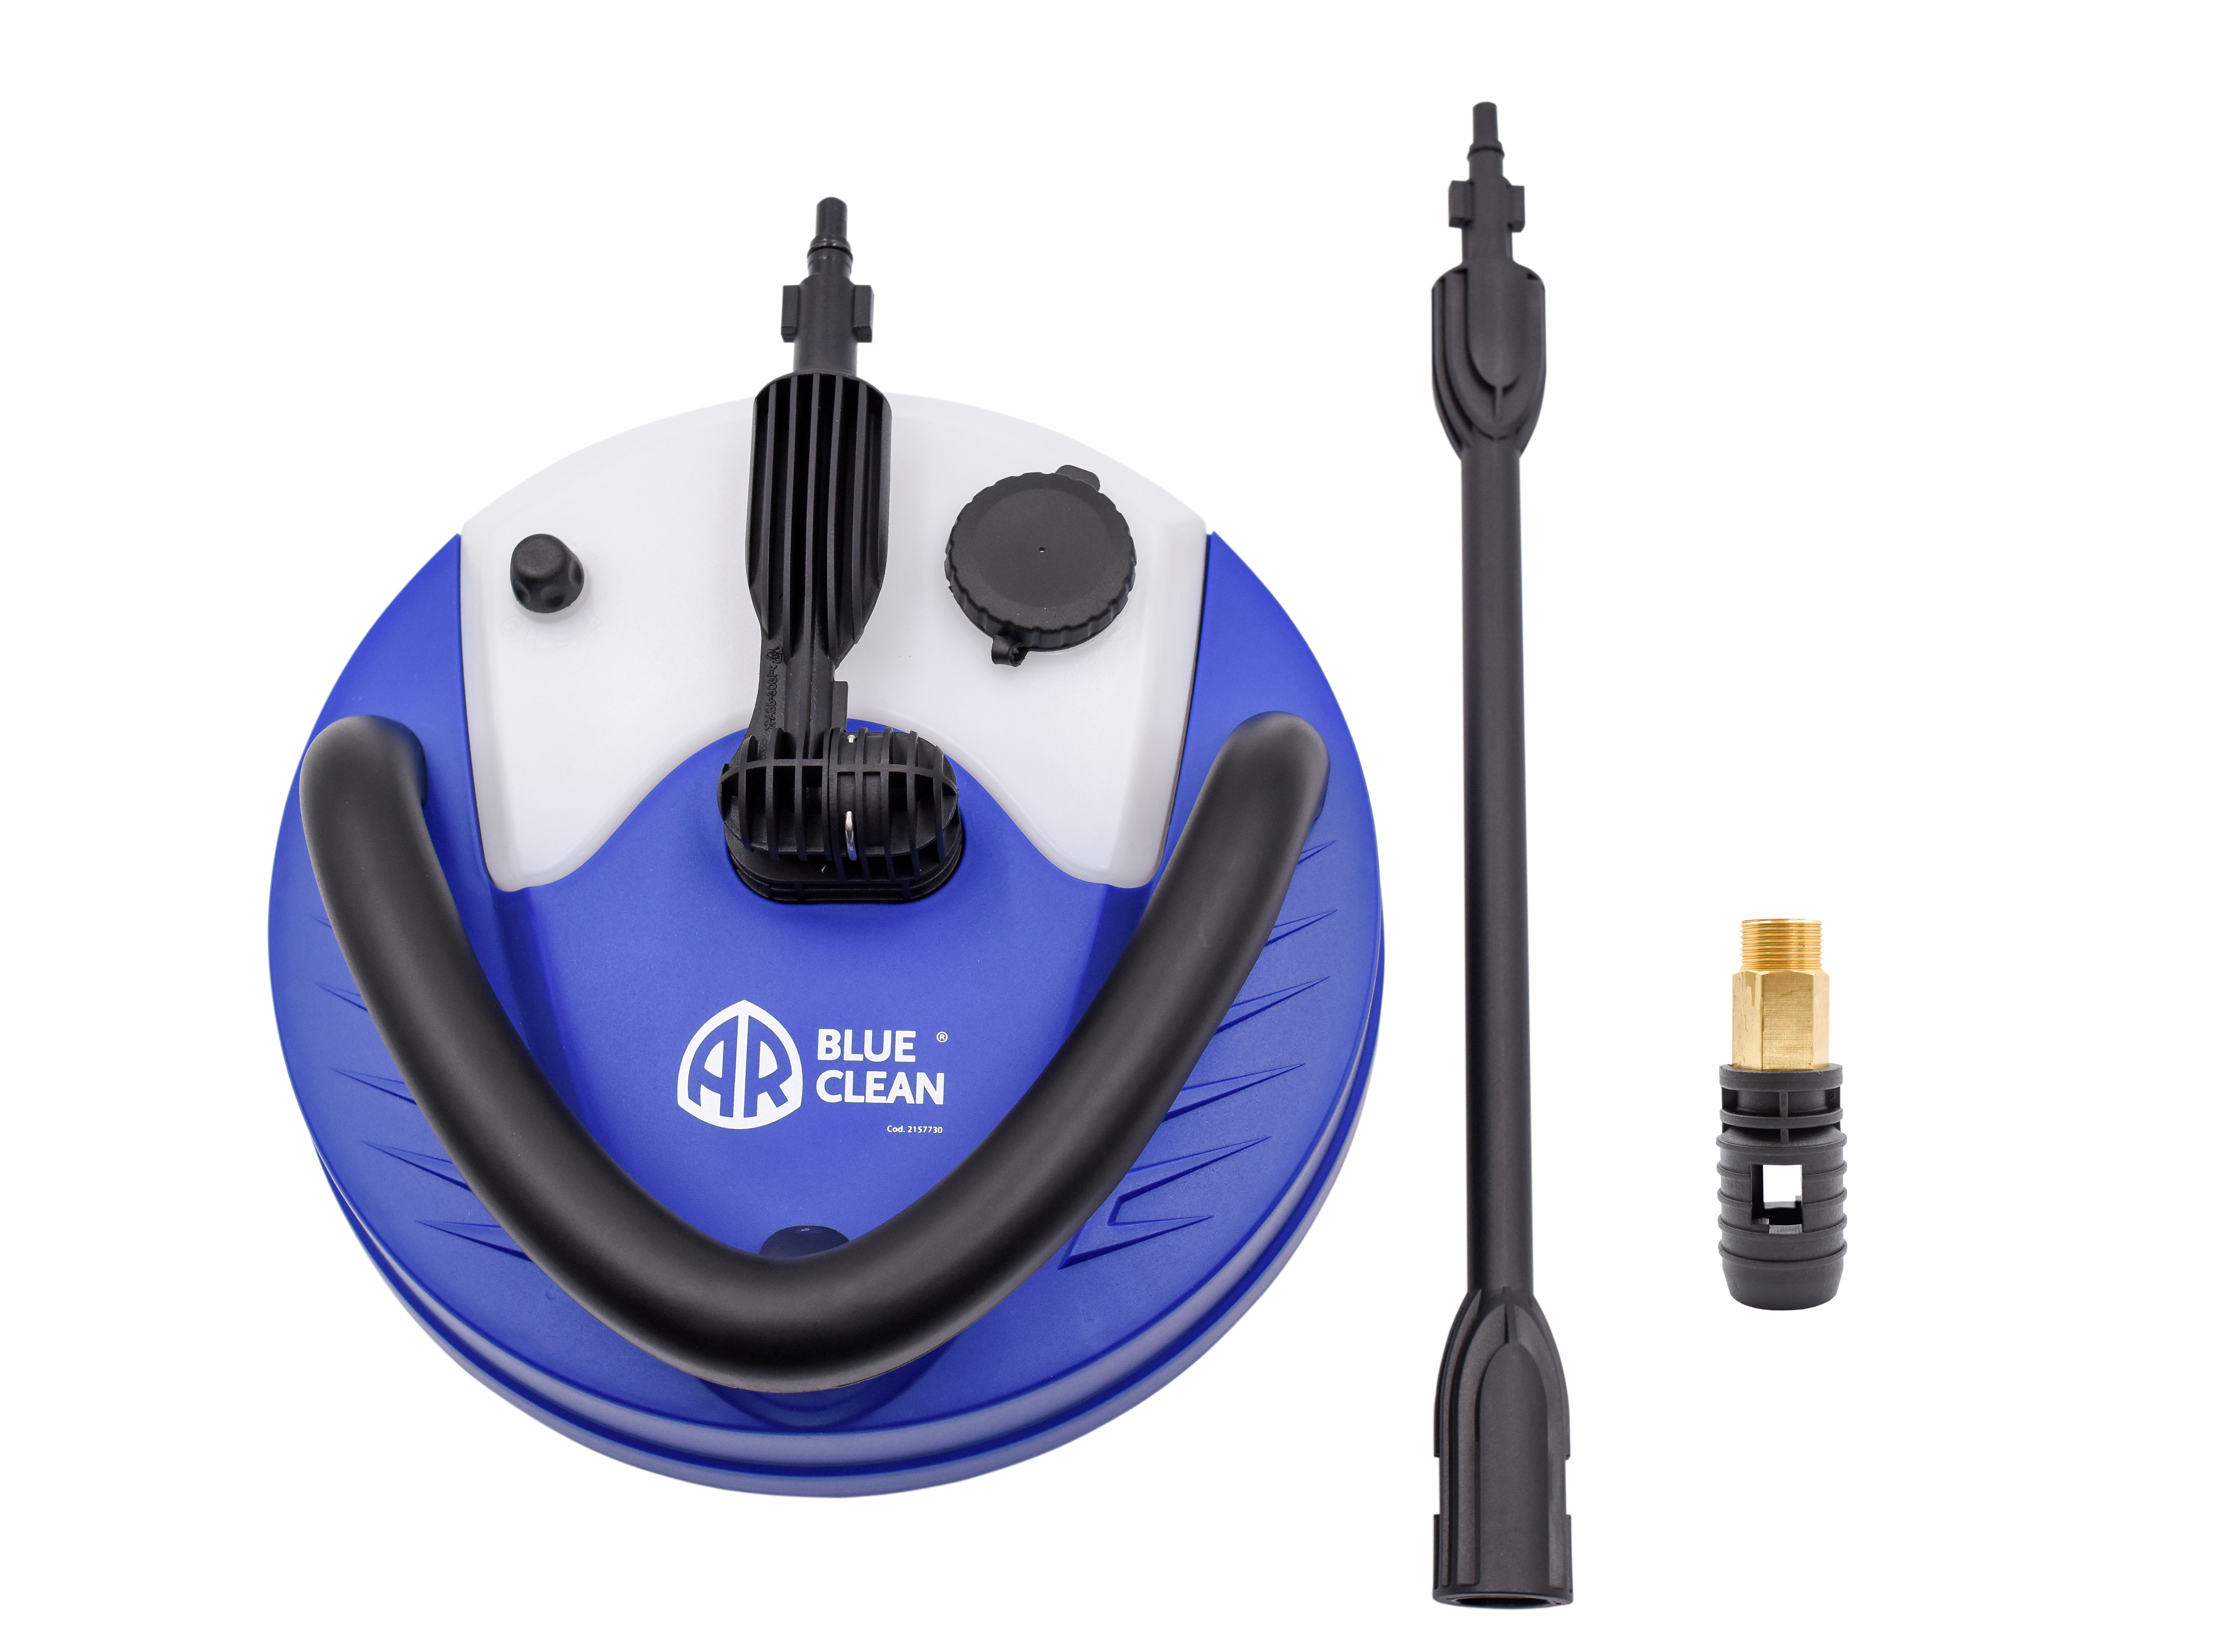 Will PW41581 12" surface cleaner work with AR143S-Q2 power washer?